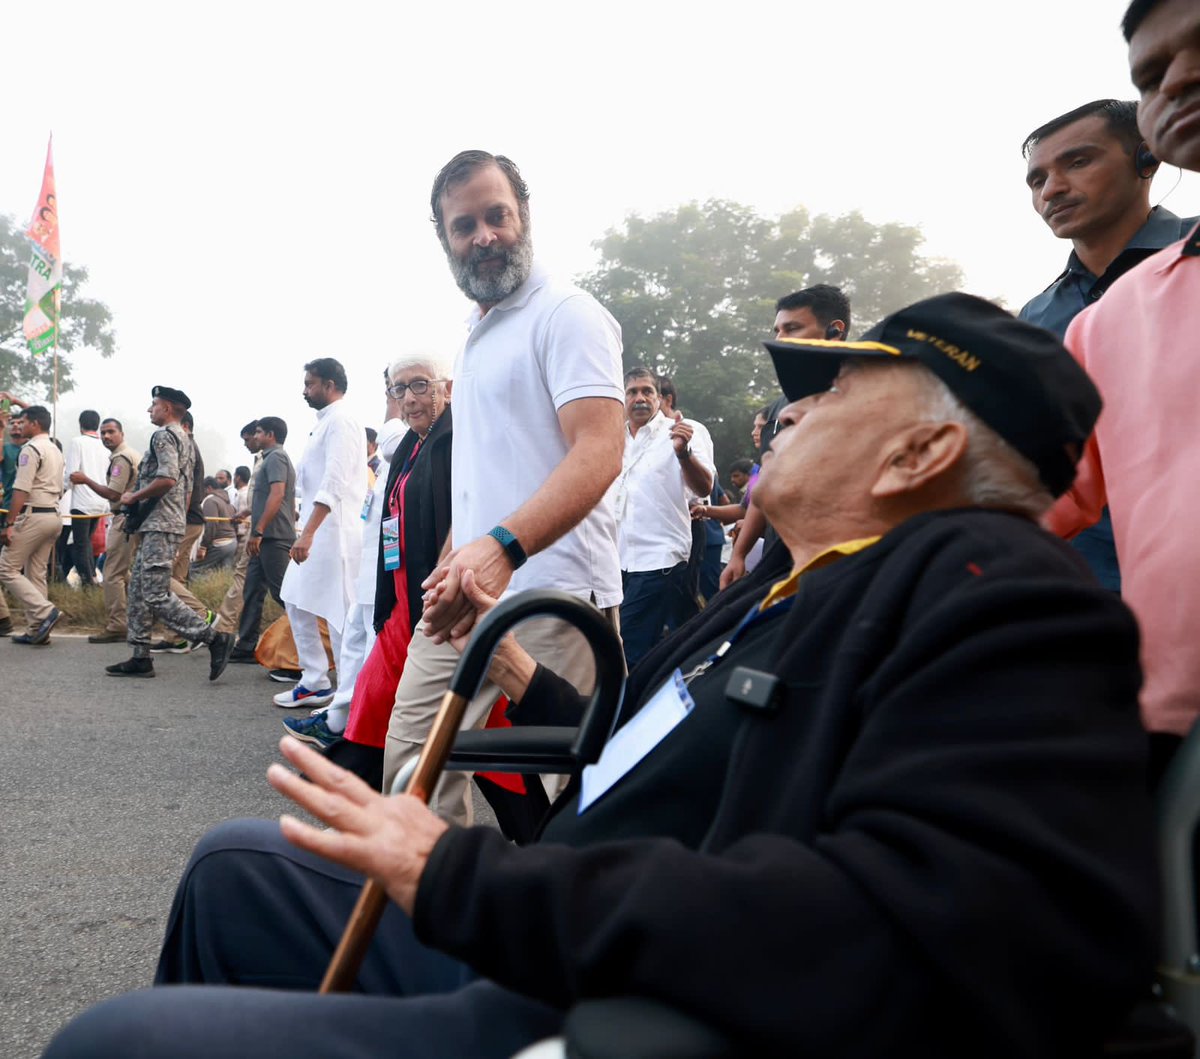 Admiral Ramdas, former Chief of Naval Staff, who at 89 continues to be an indefatigable campaigner for public causes, along with his wife Lalita Ramdas, herself the daughter of Admiral Katari, 1st Indian Chief of Naval Staff, walked with @RahulGandhi on Day 57 of #BharatJodoYatra